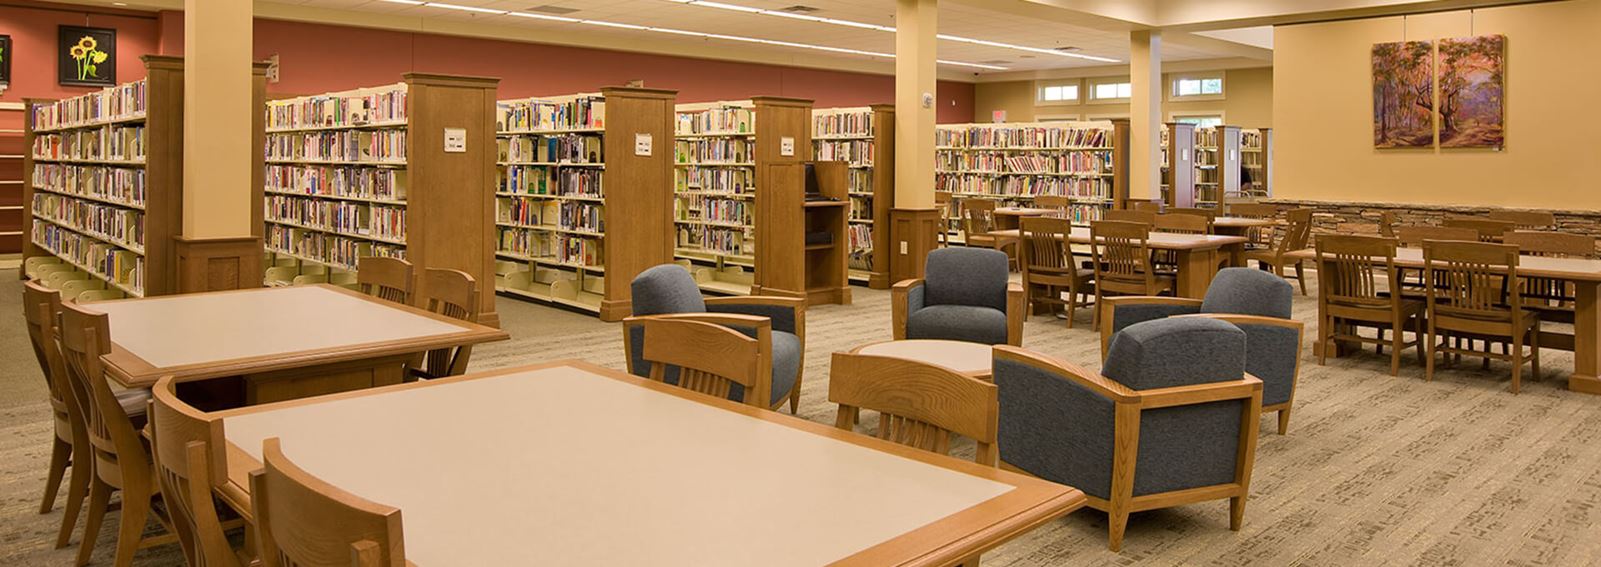 Interior picture of the Spout Springs Library